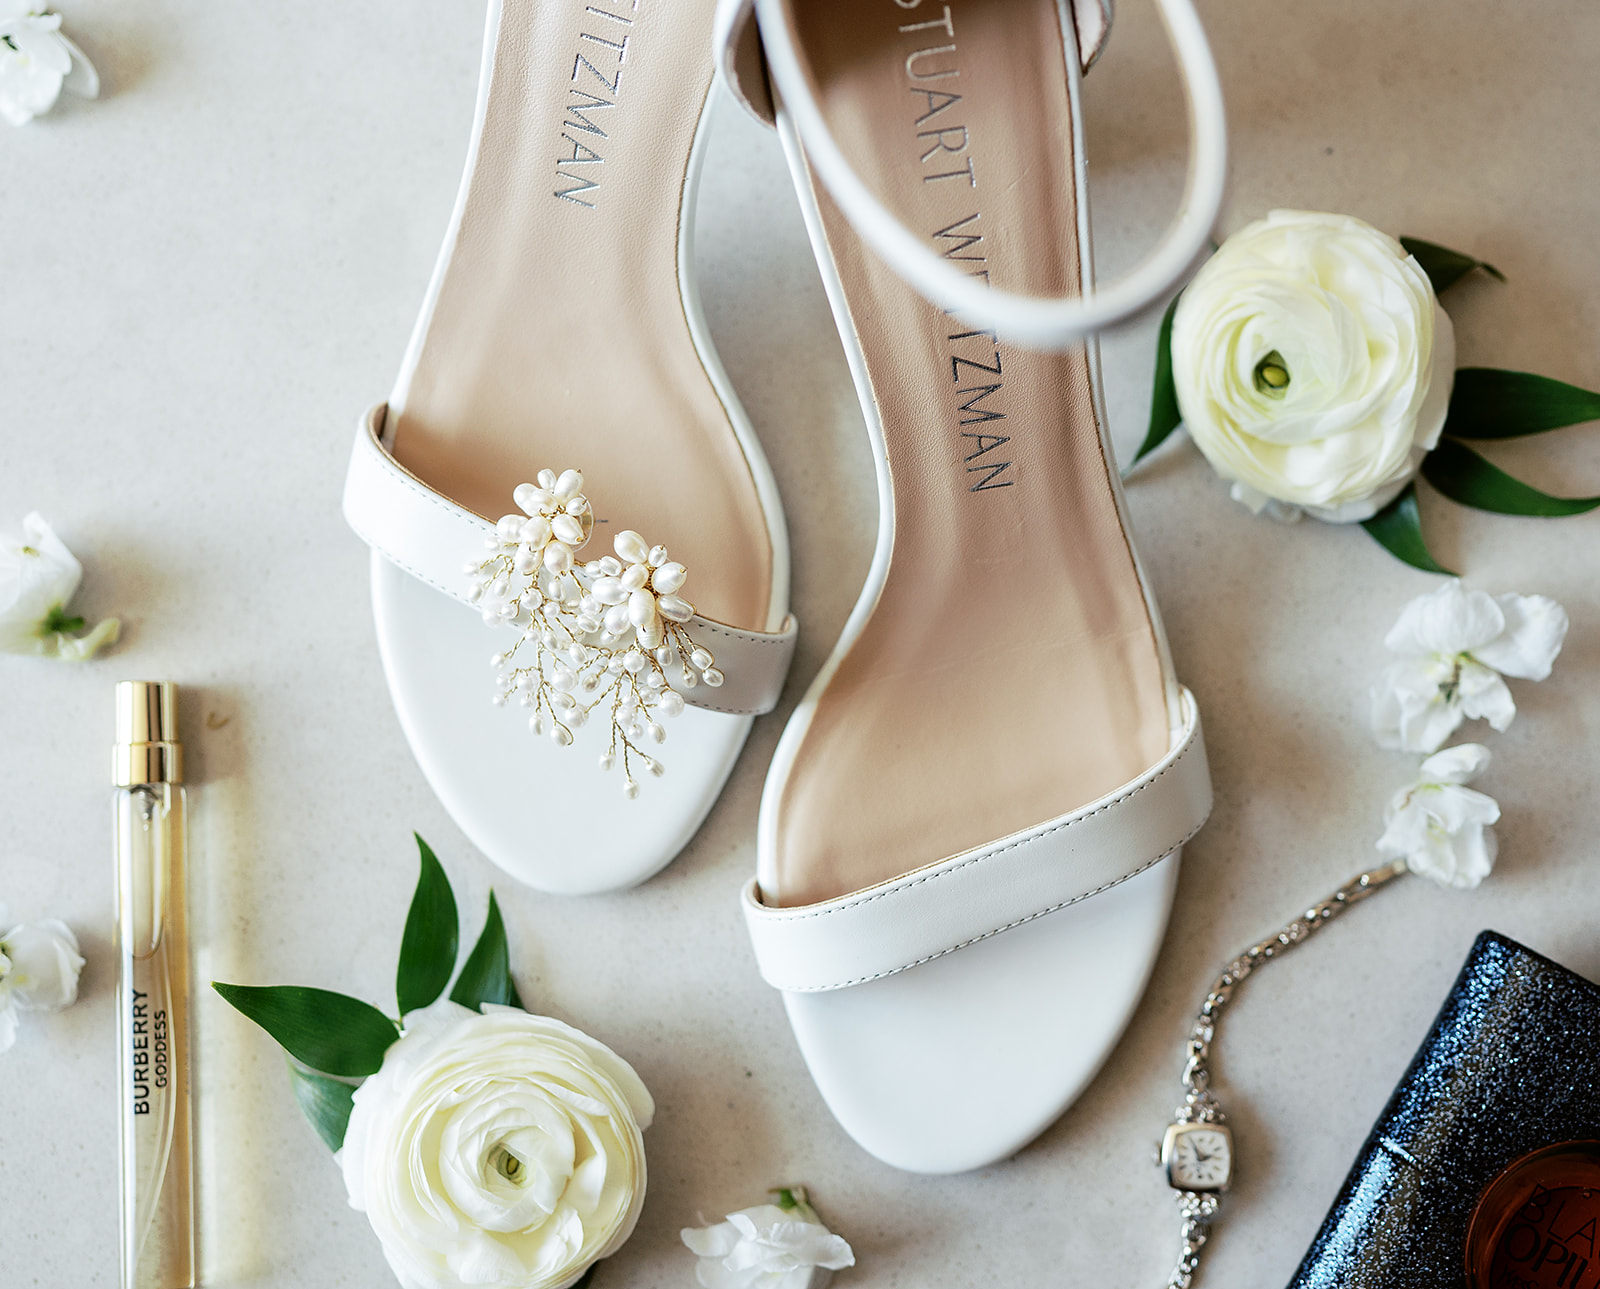 Details of a bride's perfume, earrings, shoes, and white flowers